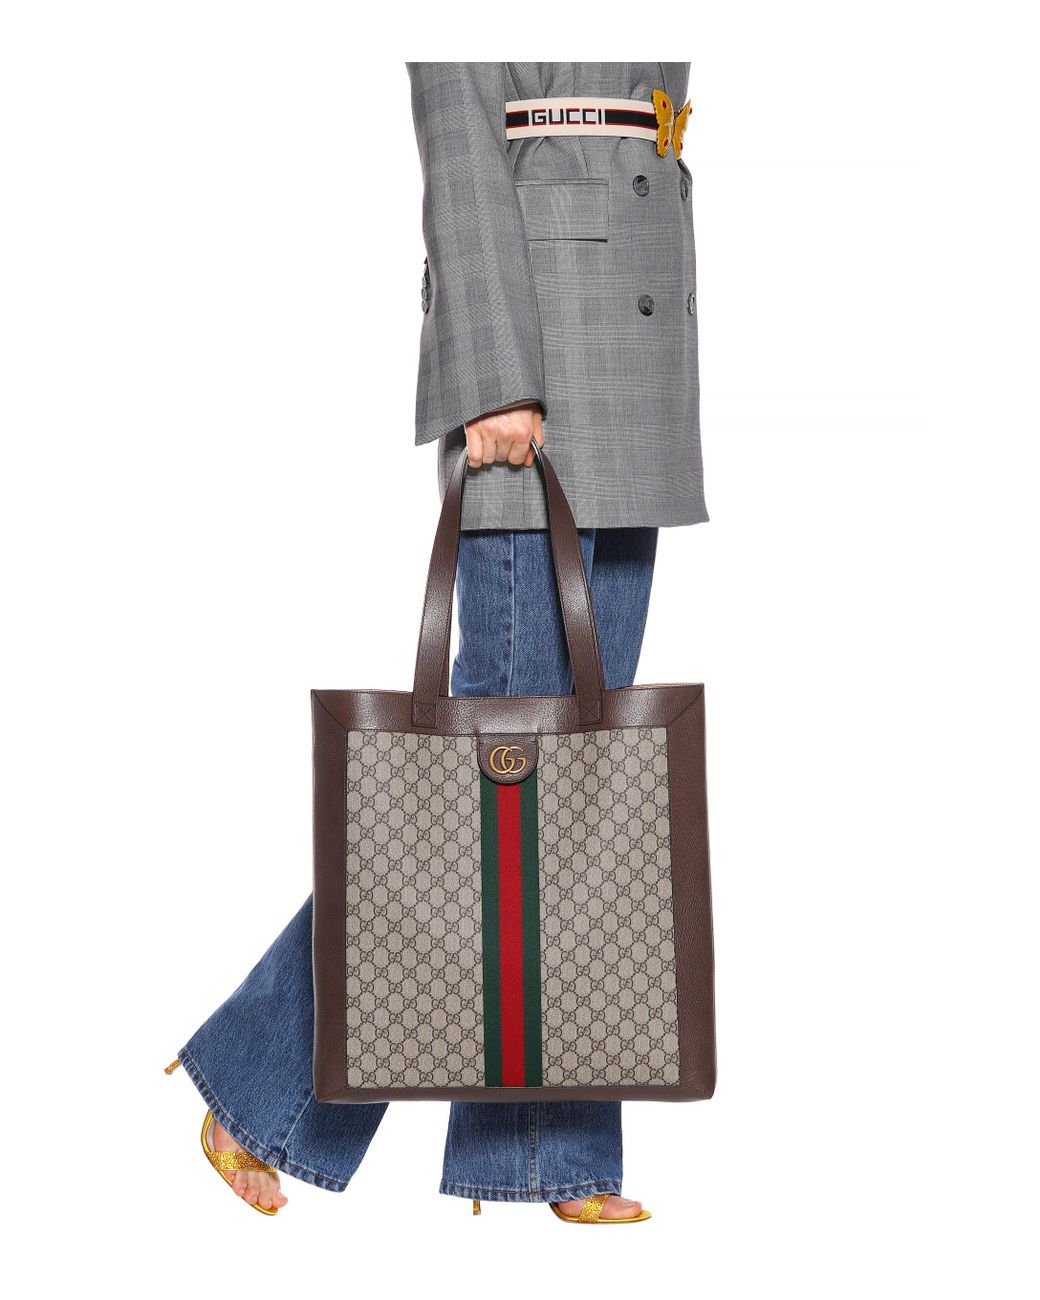 Gucci Ophidia GG Supreme Large Tote | Lyst